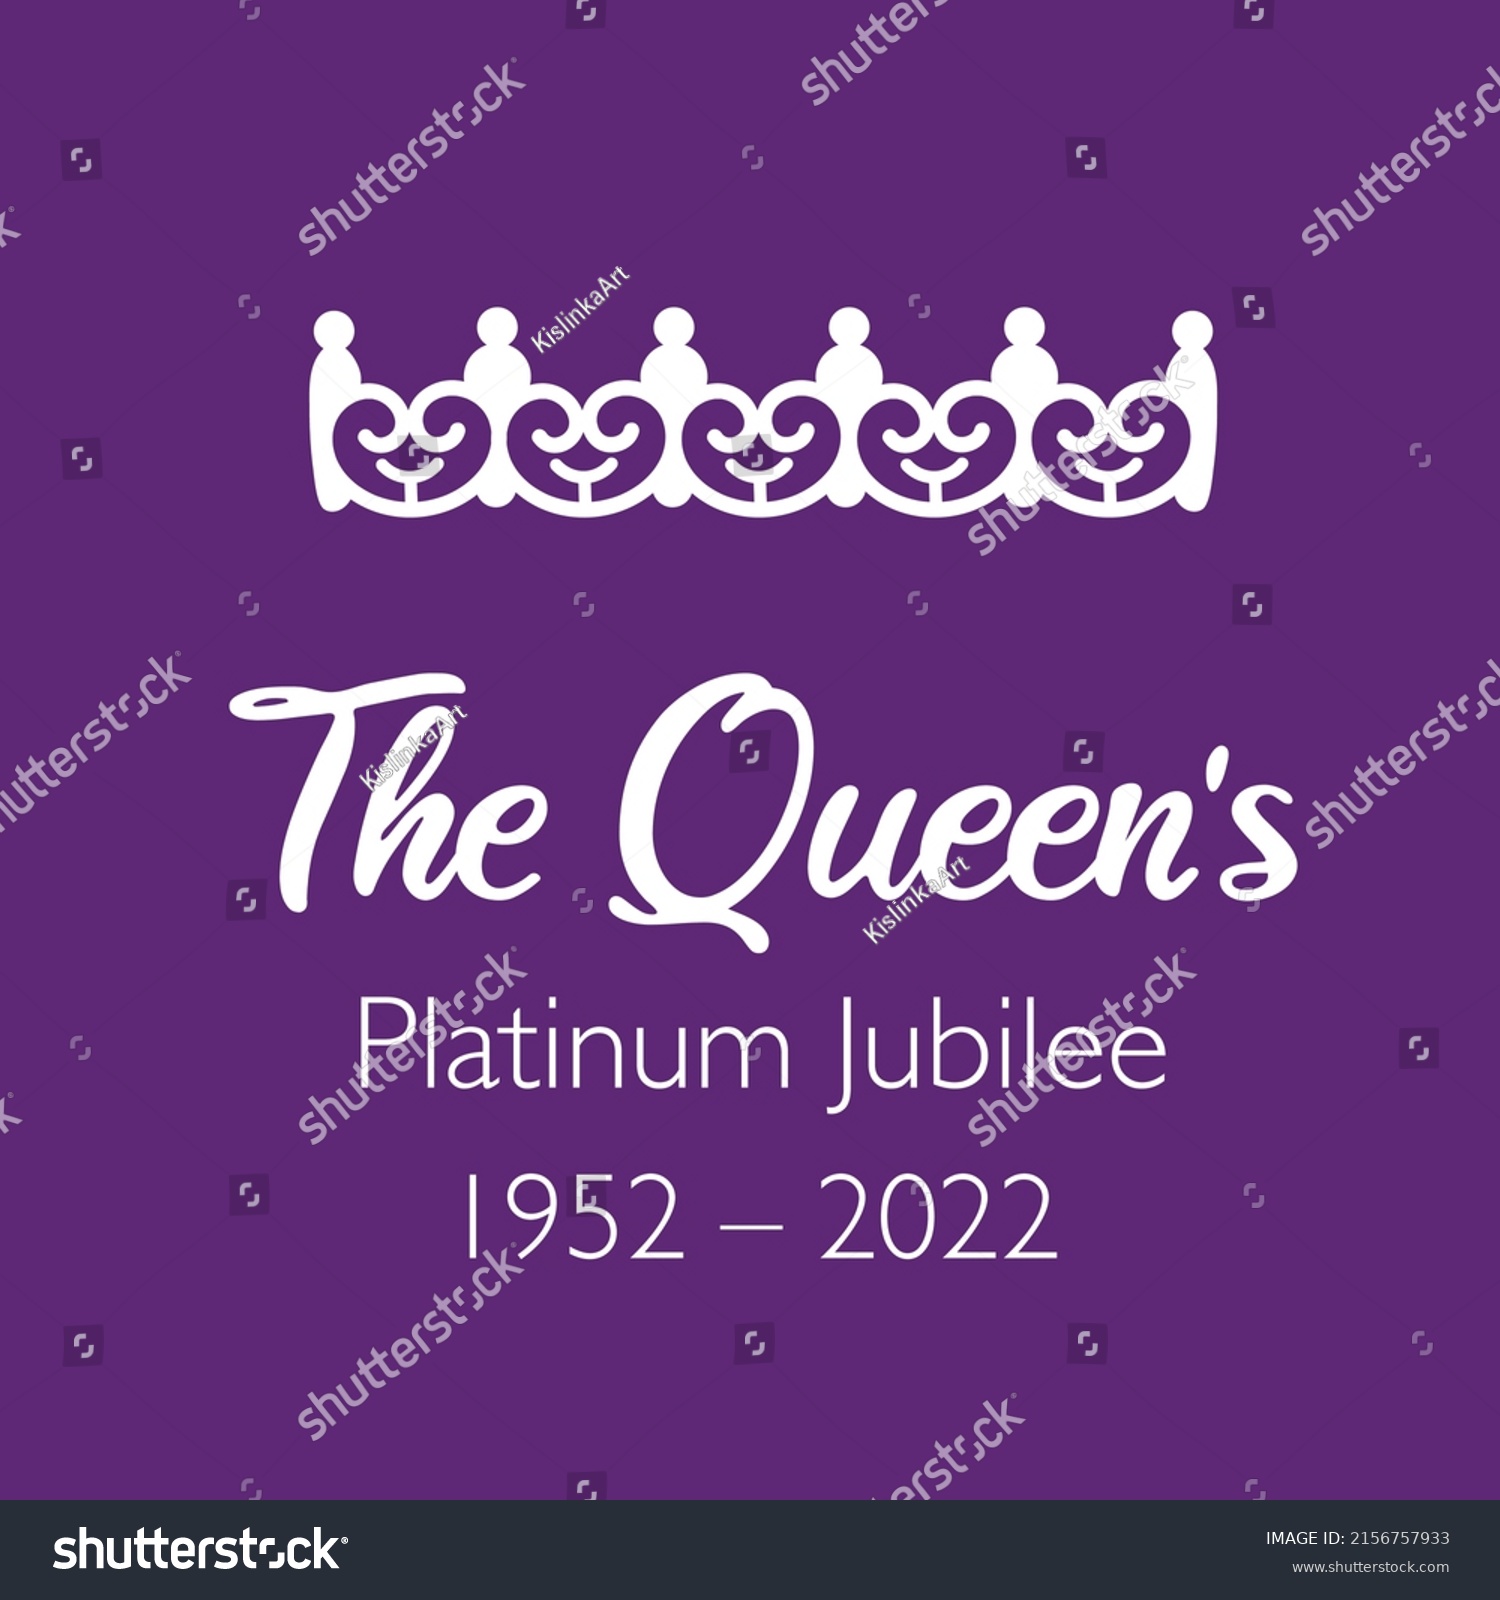 SVG of The Queen's Platinum Jubilee celebration banner Queen Elizabeth’s crown 70 years. Ideal design for banners, flayers, social media, stickers, greeting cards.  svg